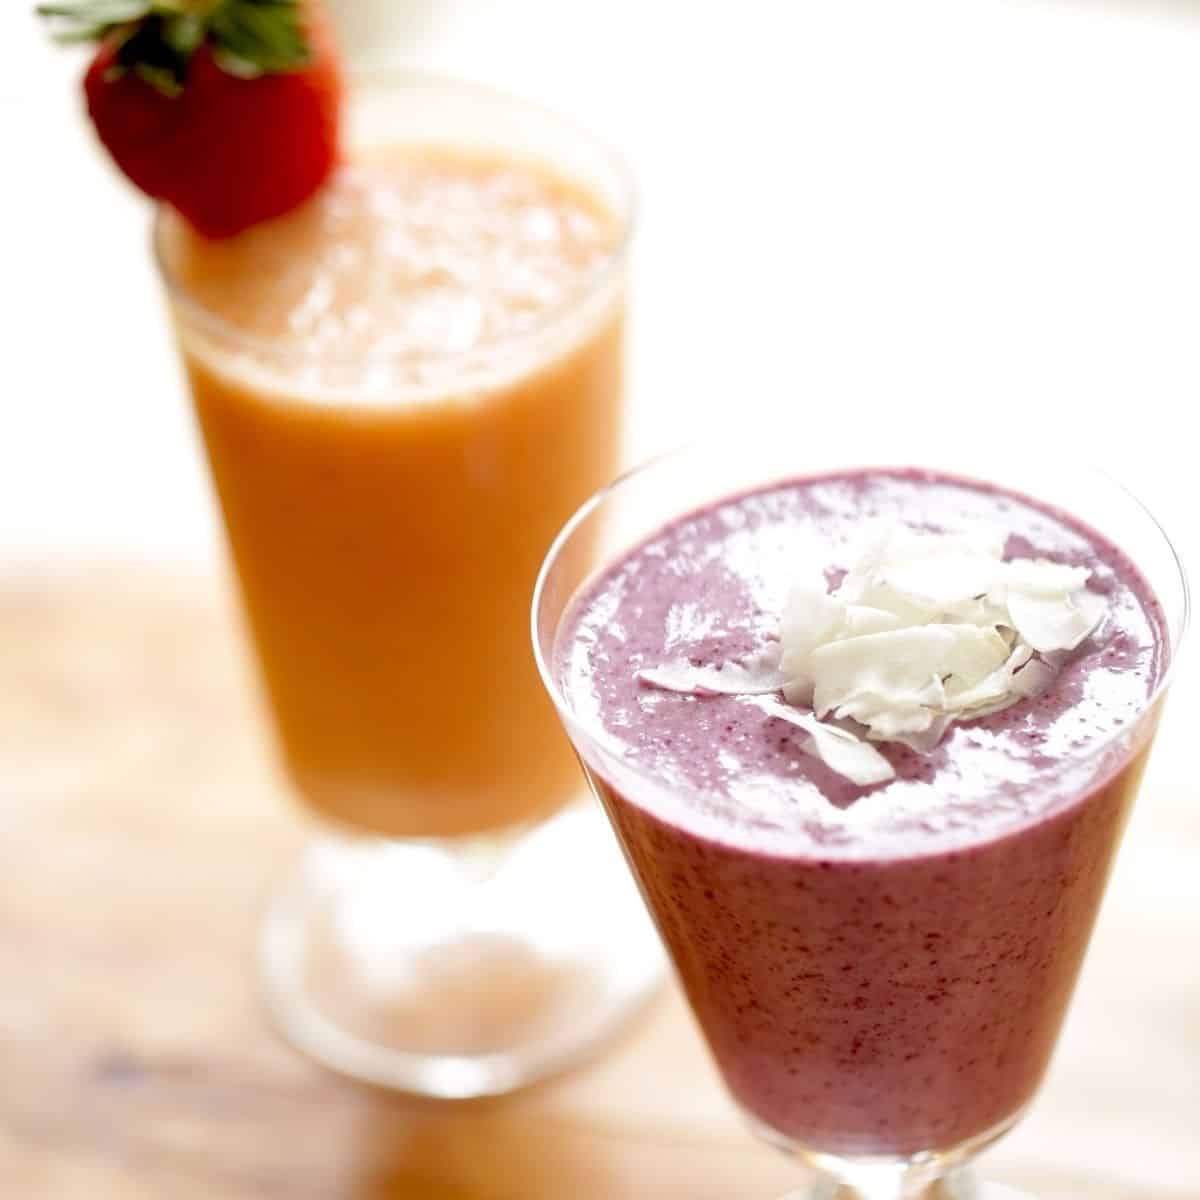 A Tropical Smoothie and a Blueberry Smoothie on a table